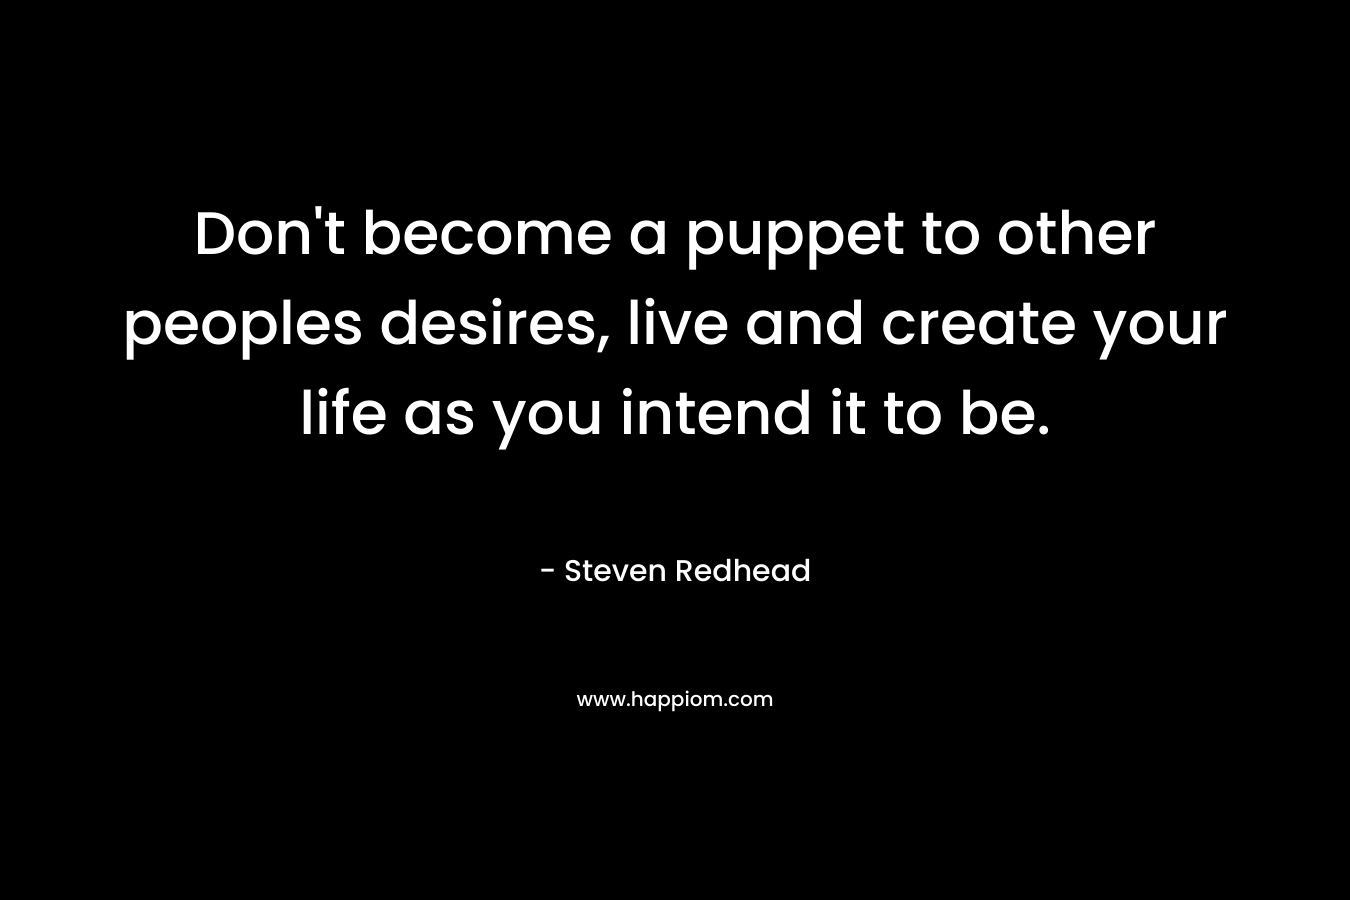 Don’t become a puppet to other peoples desires, live and create your life as you intend it to be. – Steven Redhead